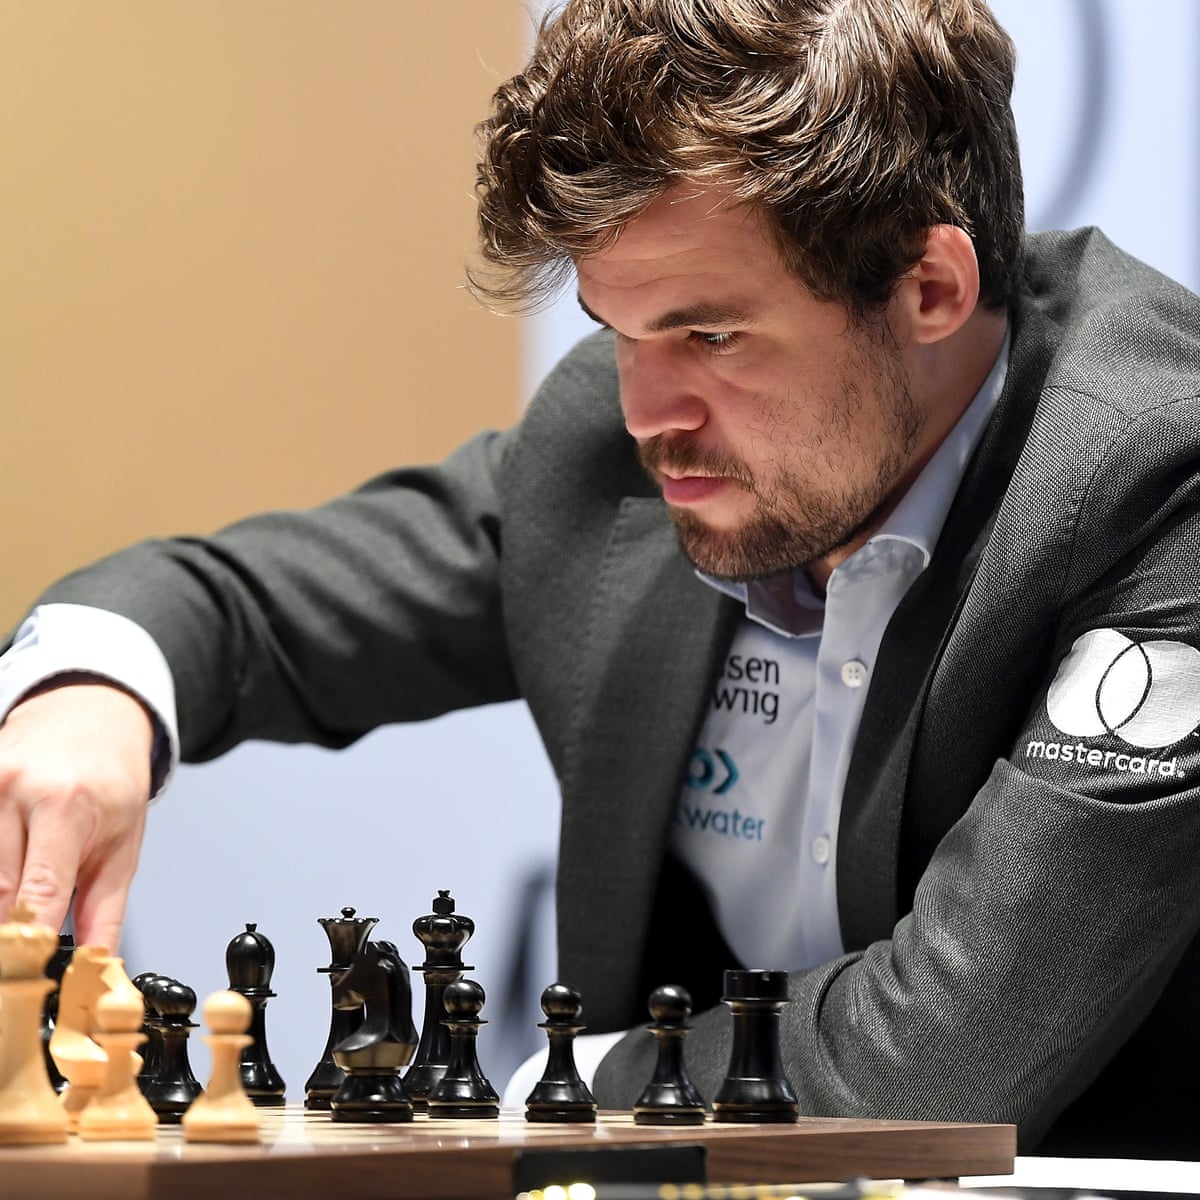 How 21-Year-Old World Chess Champion Magnus Carlsen Became Such a